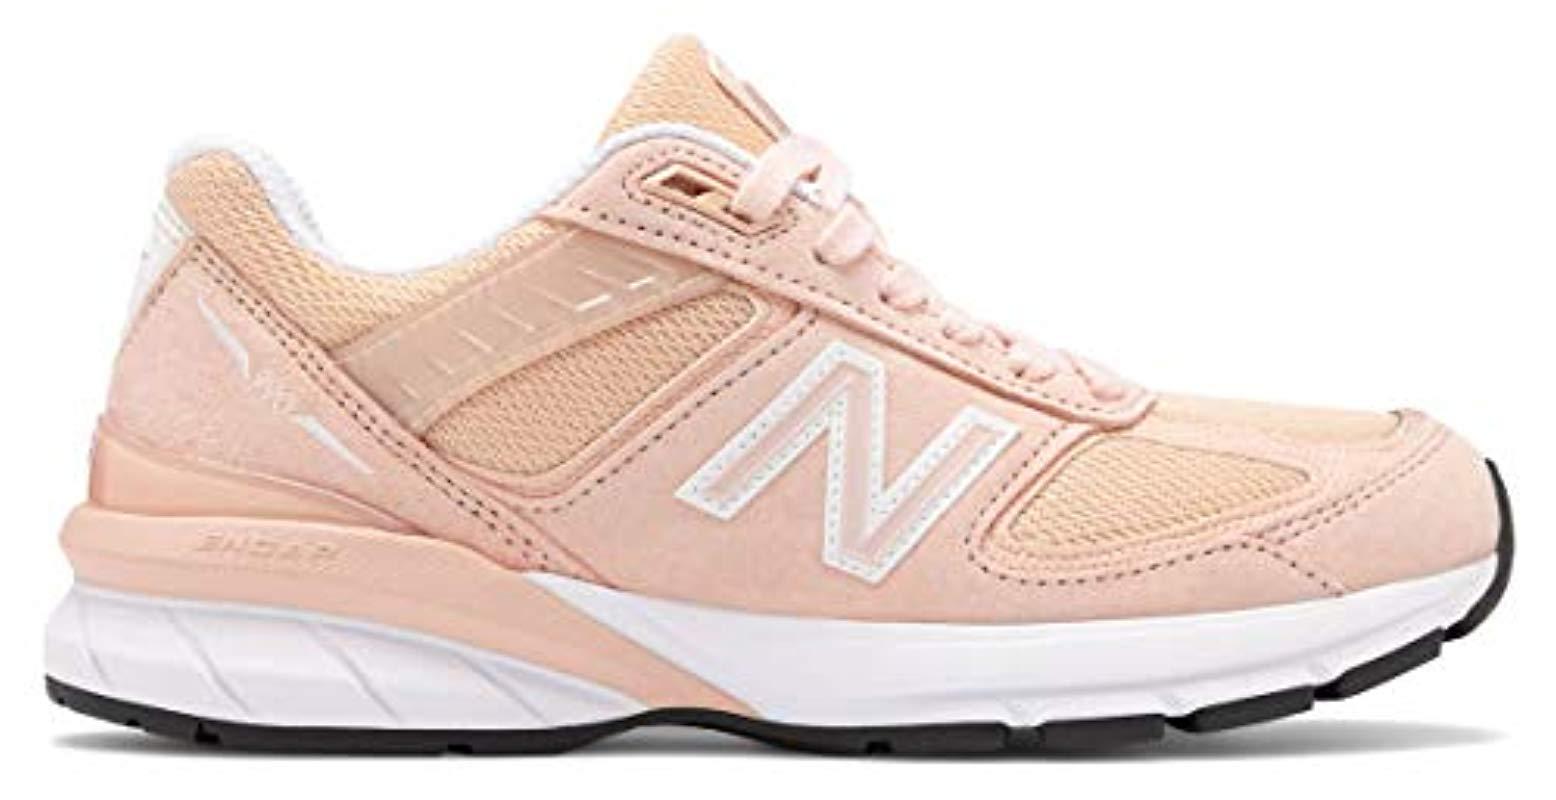 New Balance 990v5 Made In The Usa Sneaker in Pink | Lyst